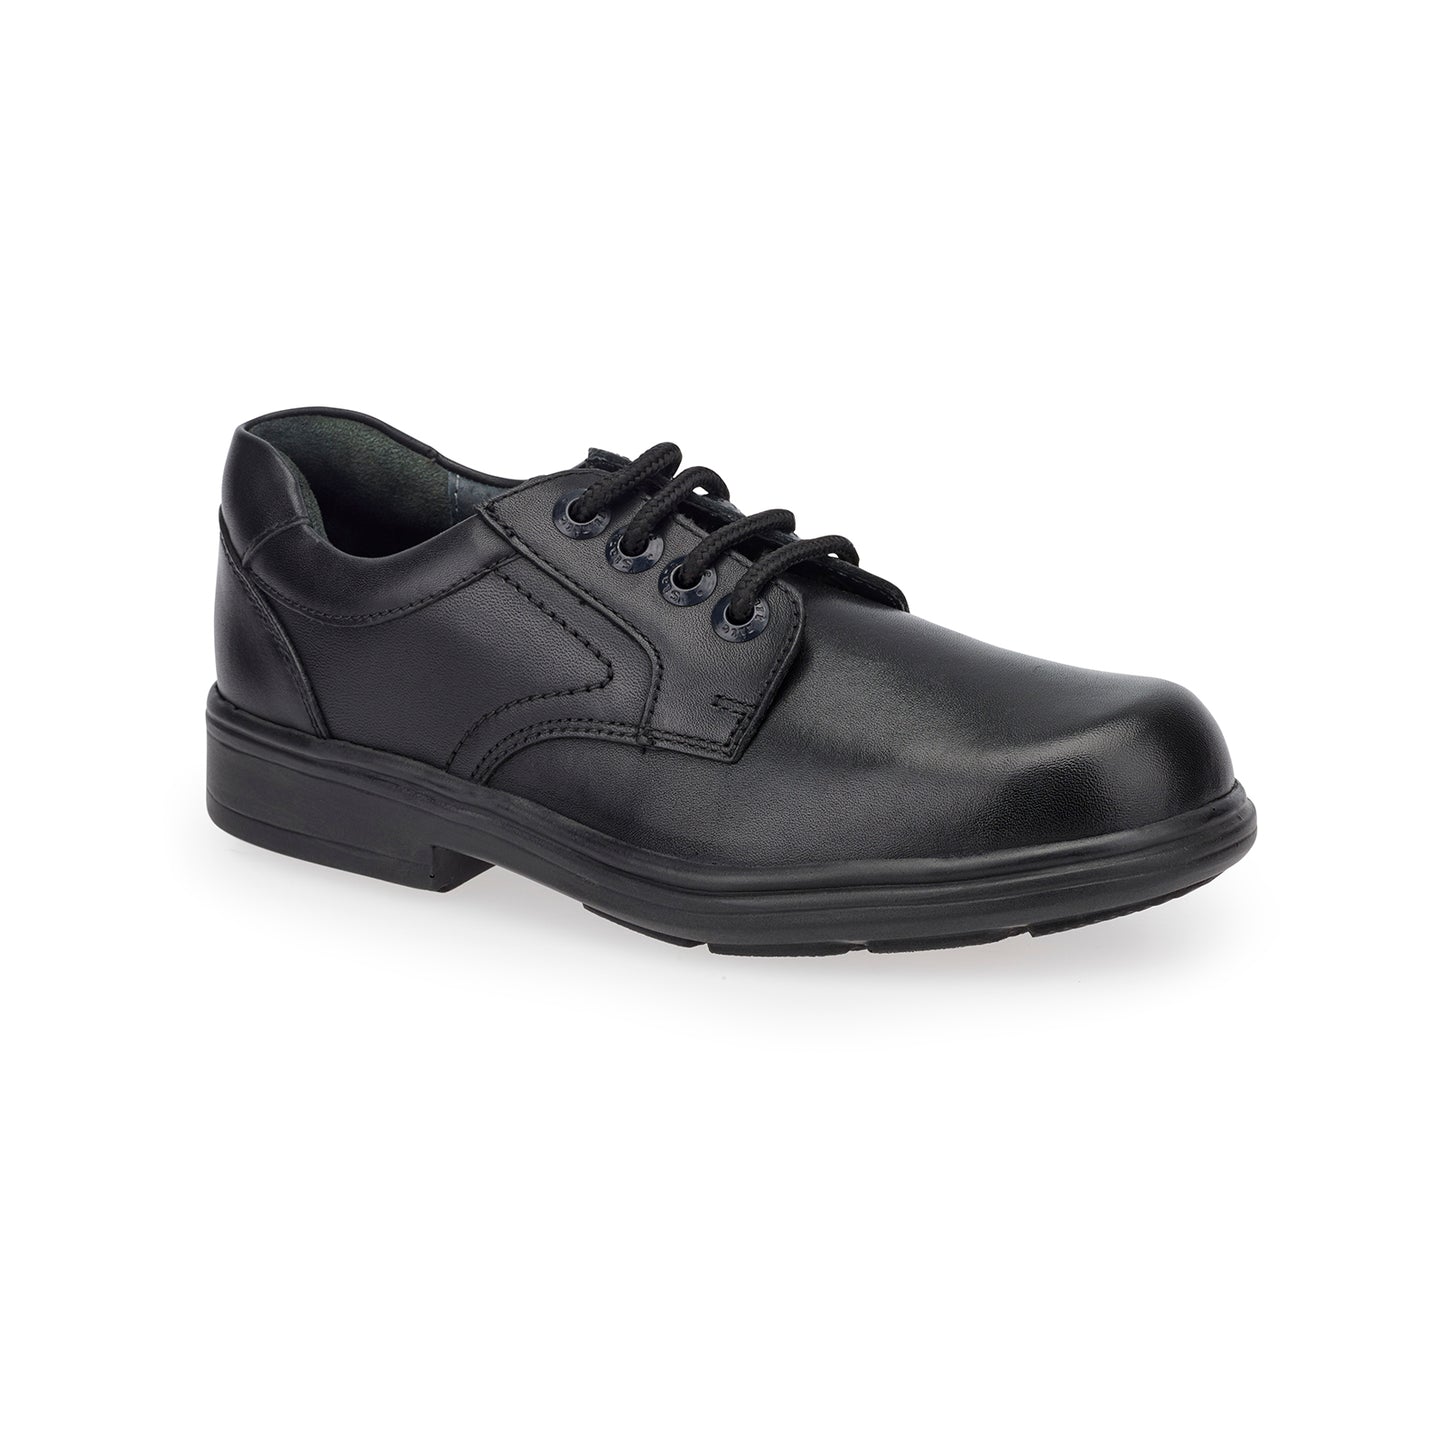 Isaac Black Leather Lace-up Boy’s Shoe